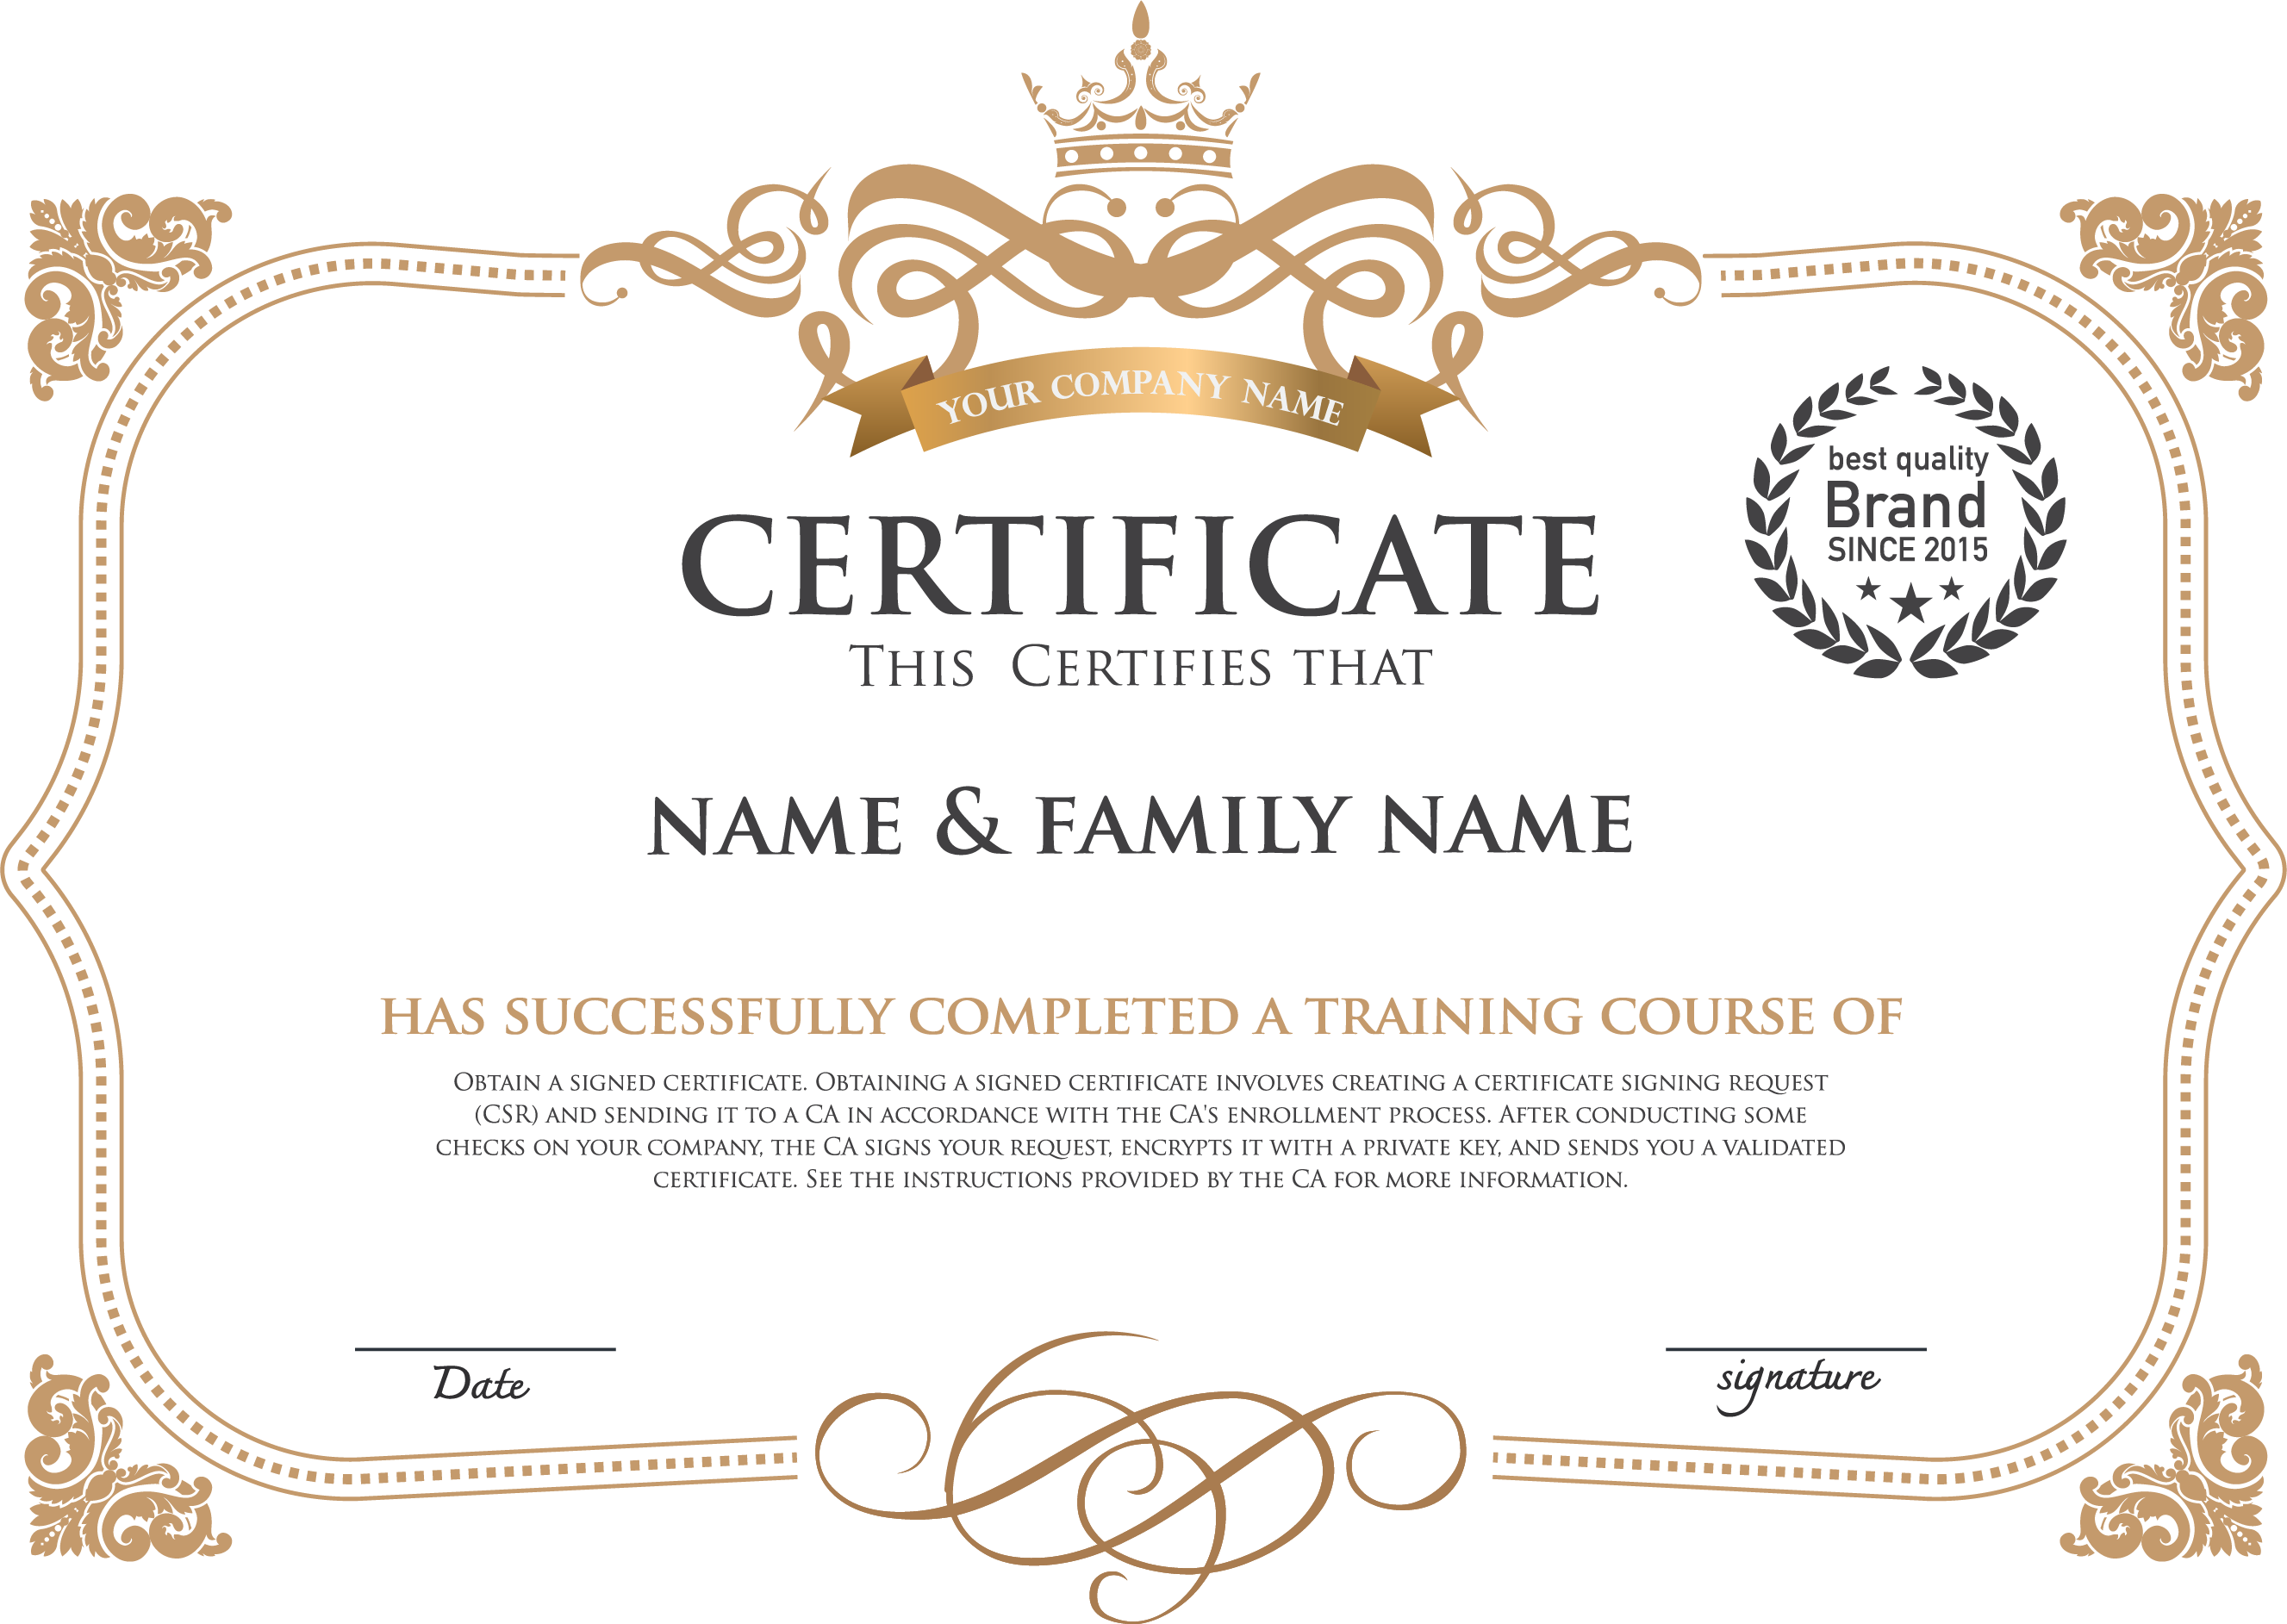 Training Course Certificate PNG HD Quality